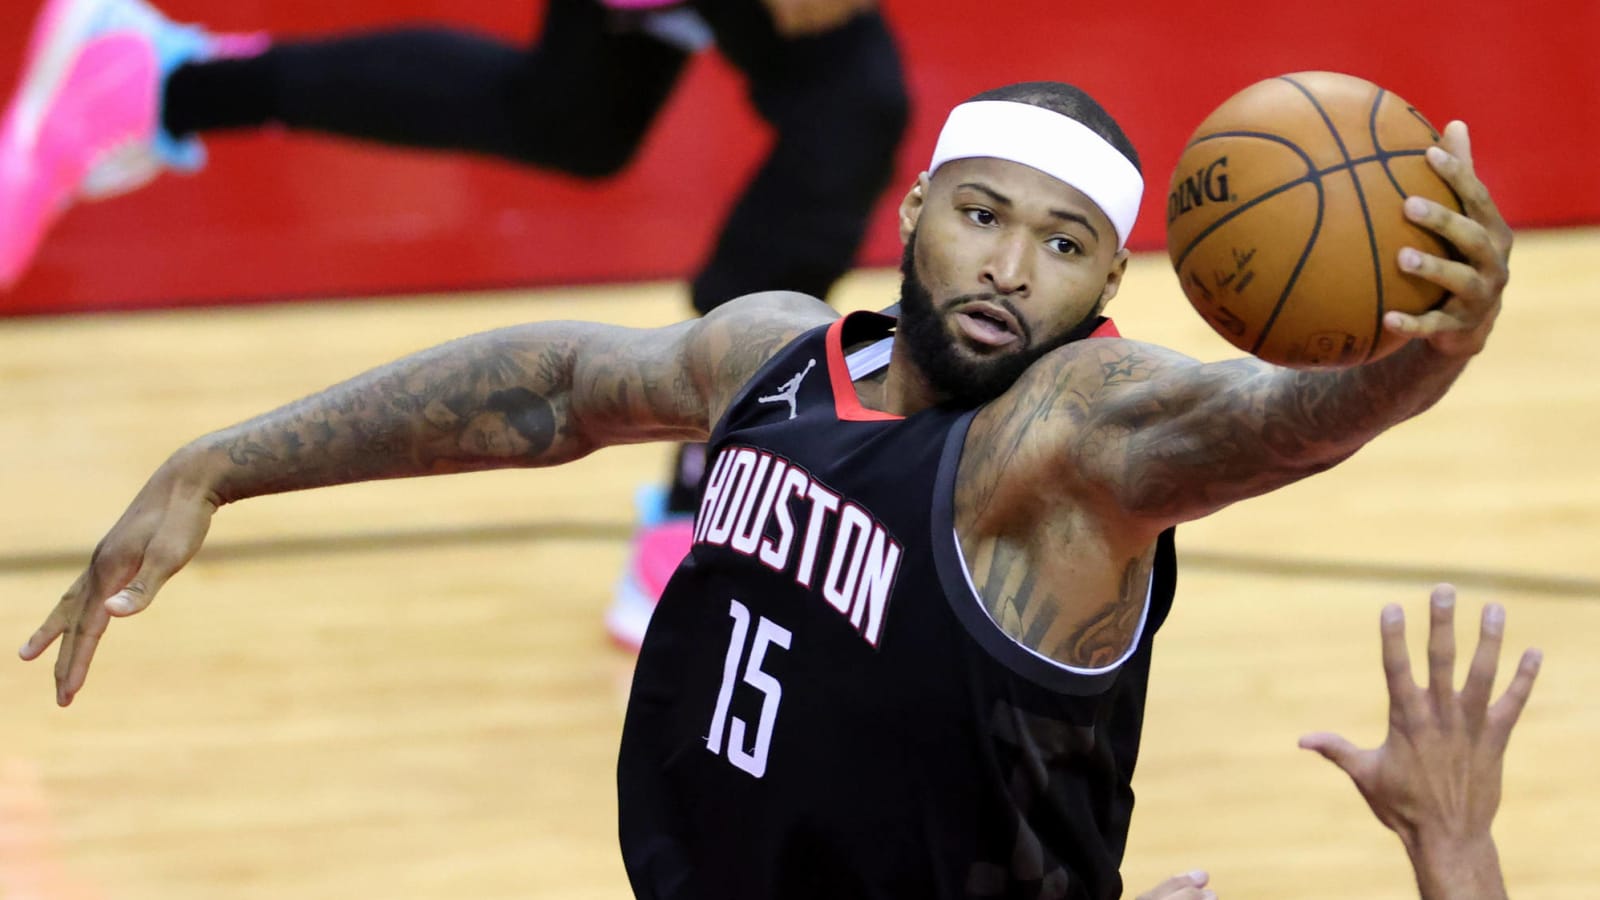 DeMarcus Cousins to be released by Rockets